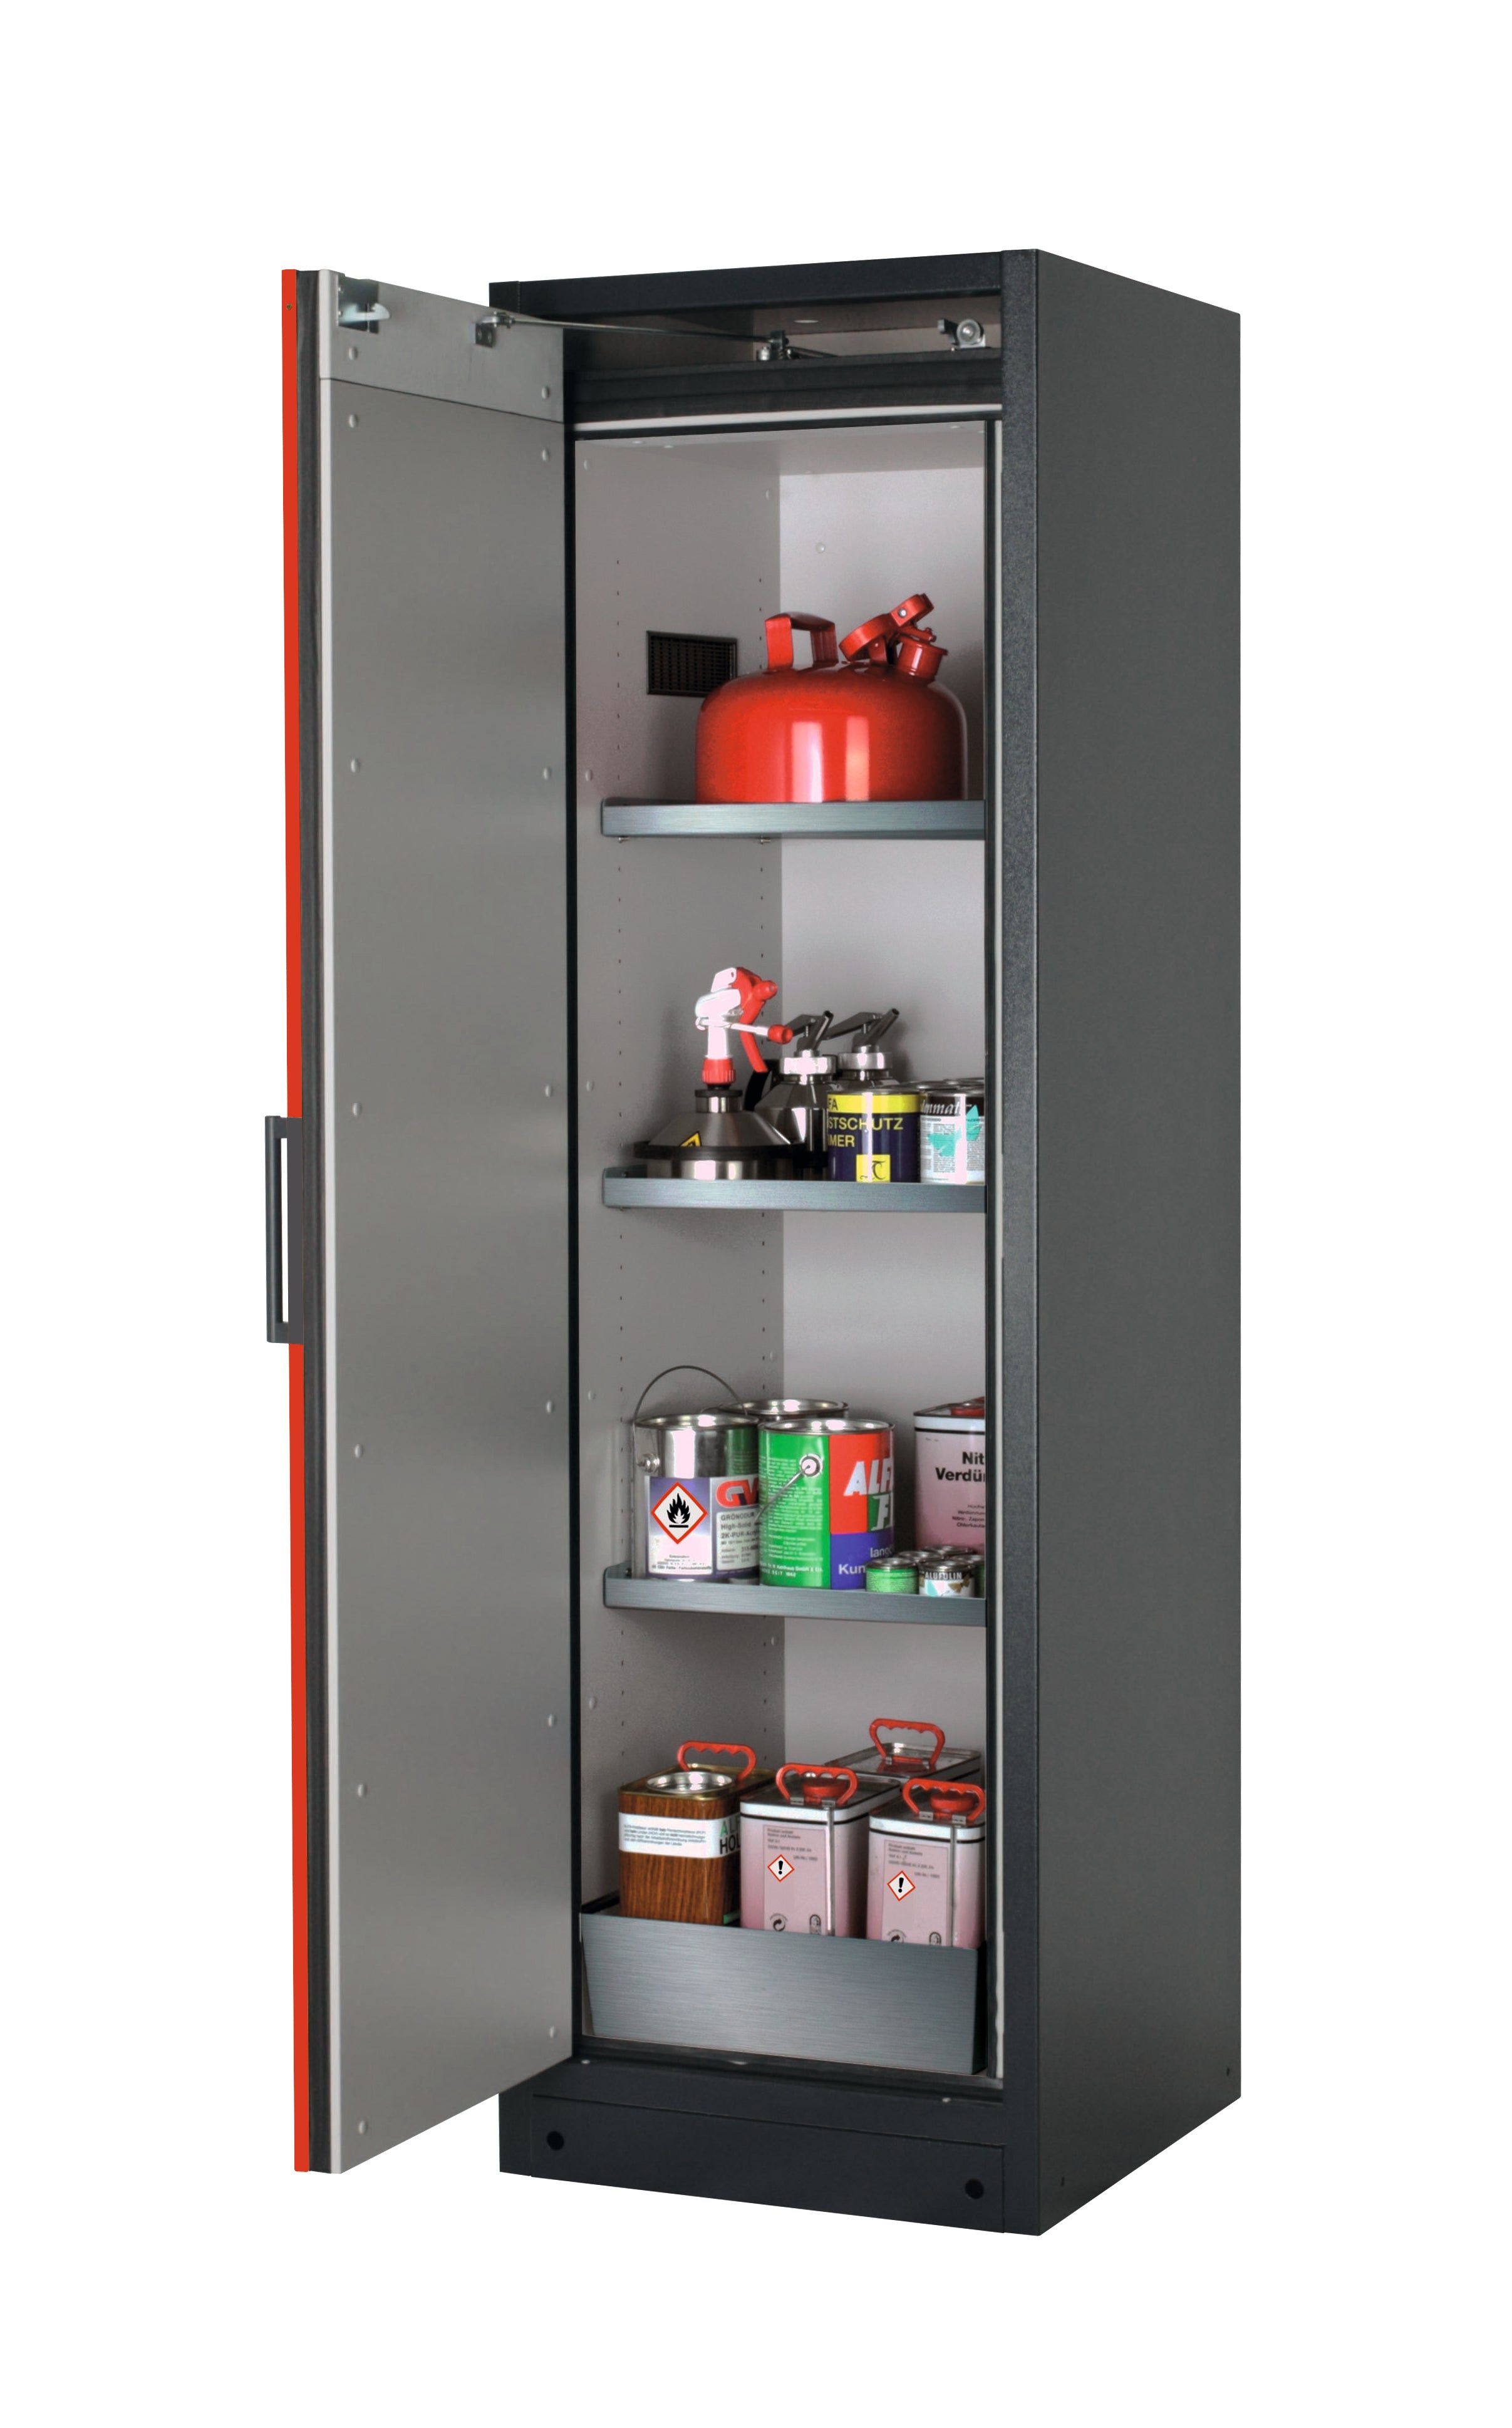 Type 90 safety storage cabinet Q-PEGASUS-90 model Q90.195.060.WDAC in traffic red RAL 3020 with 3x shelf standard (stainless steel 1.4301),